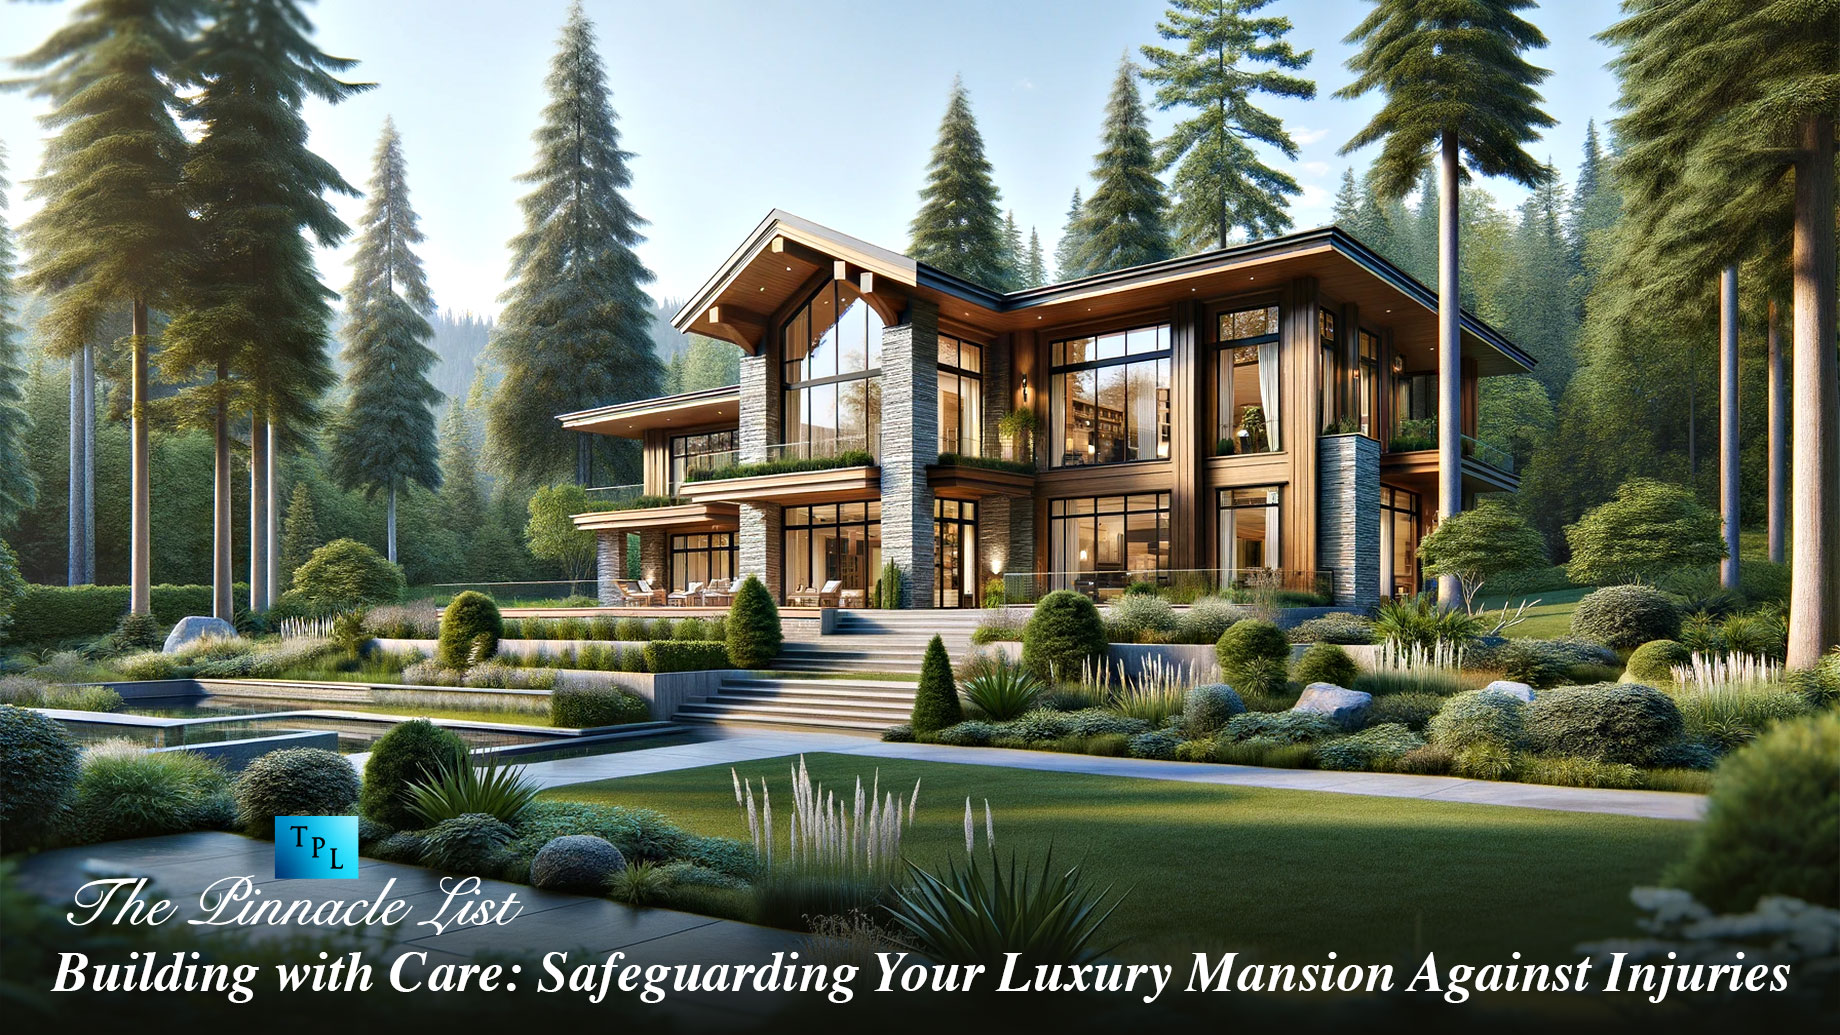 Building with Care: Safeguarding Your Luxury Mansion Against Injuries